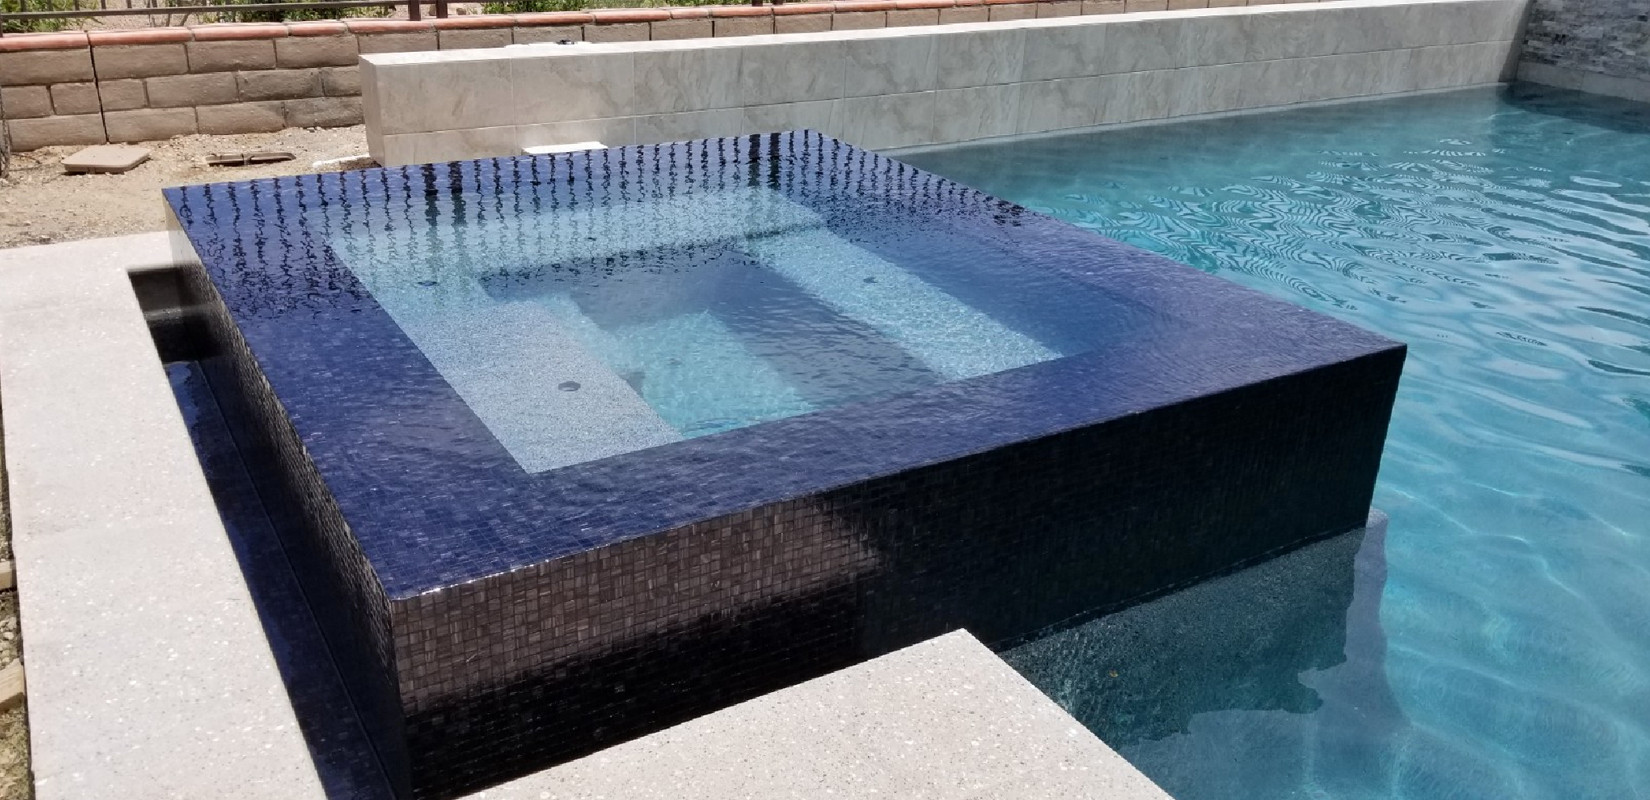 Maintaining glass mosaic tile in a swimming pool : Alpentile Tile